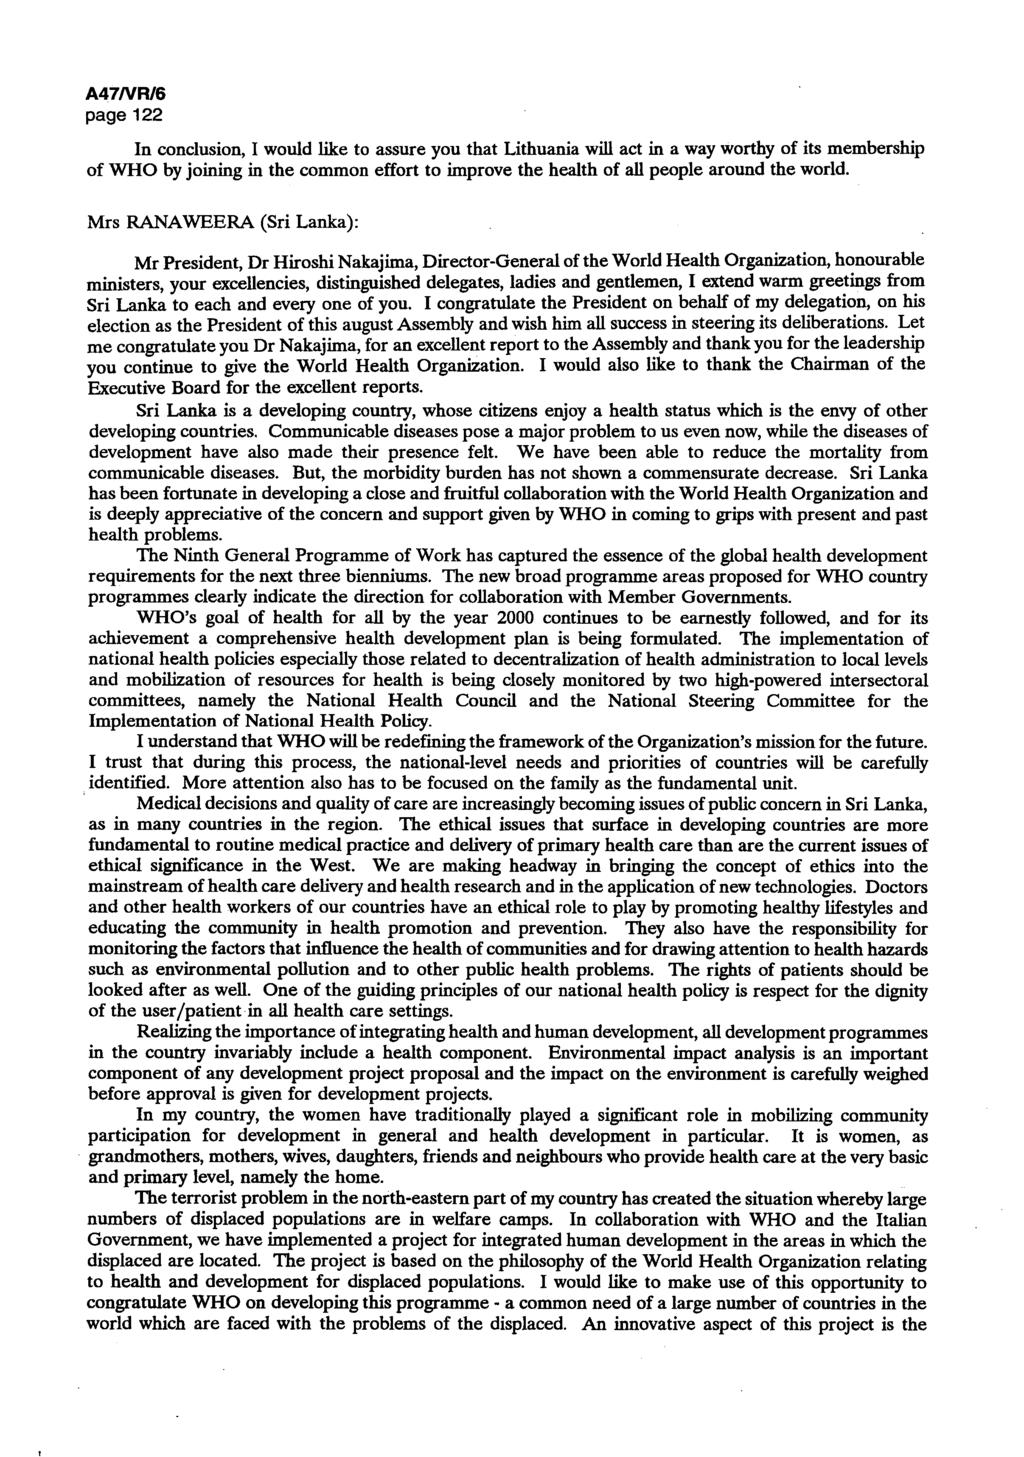 A47/VR/5 page 122 In conclusion, I would like to assure you that Lithuania will act in a way worthy of its membership of WHO by joining in the common effort to improve the health of all people around